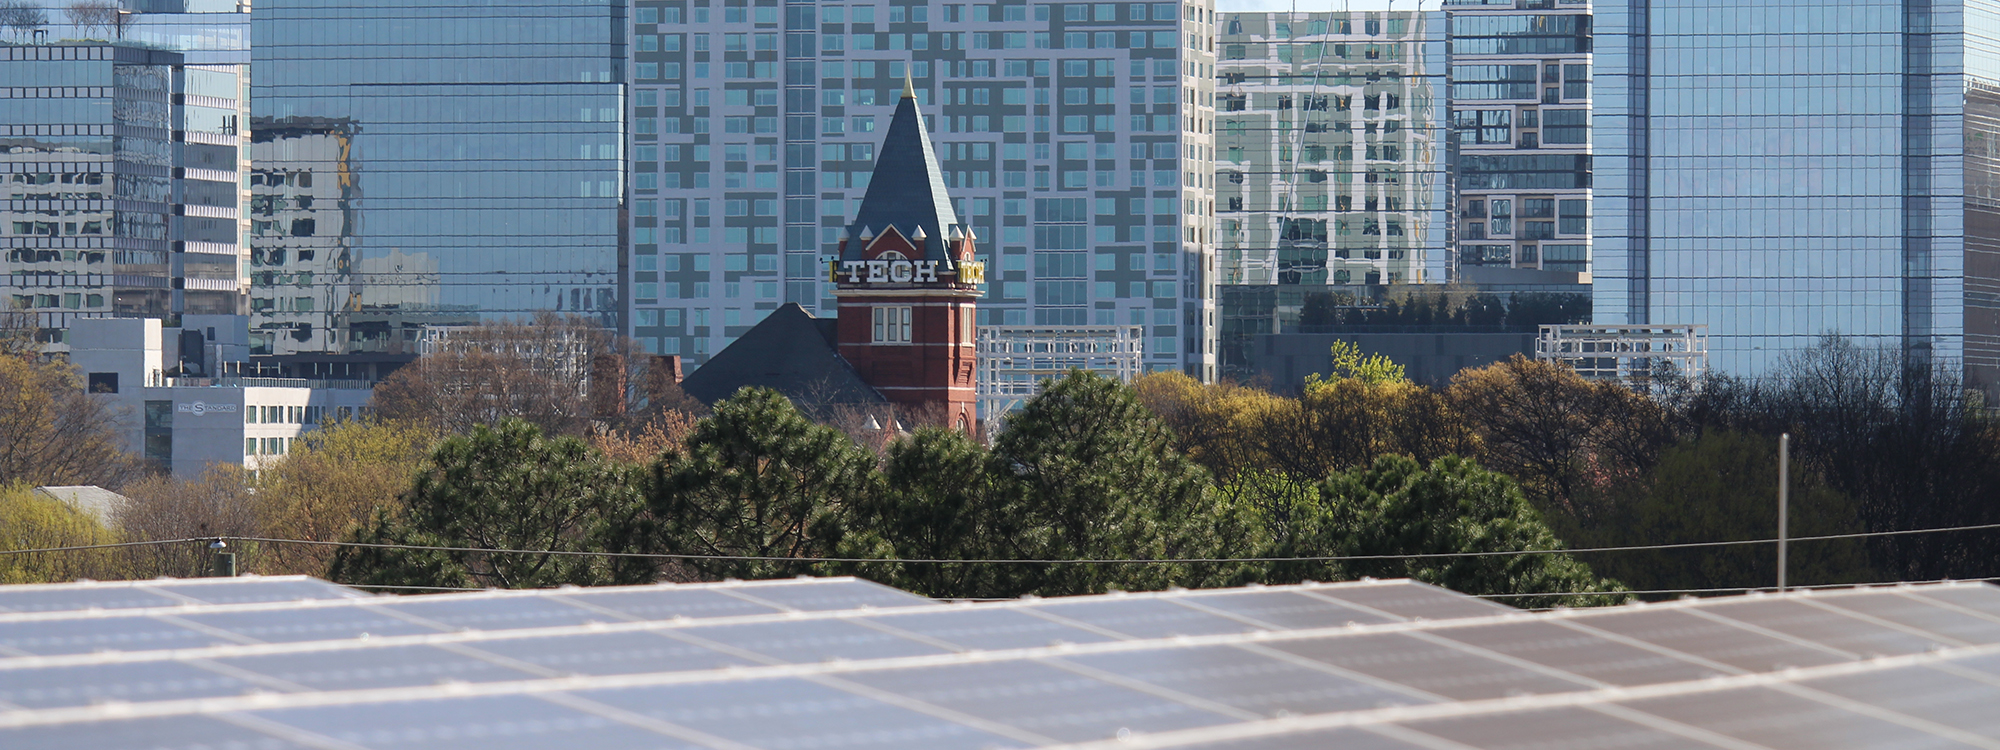 tech tower visible behind solar panels on top of the carbon neutral energy solutions laboratory - photo by steven gagliano